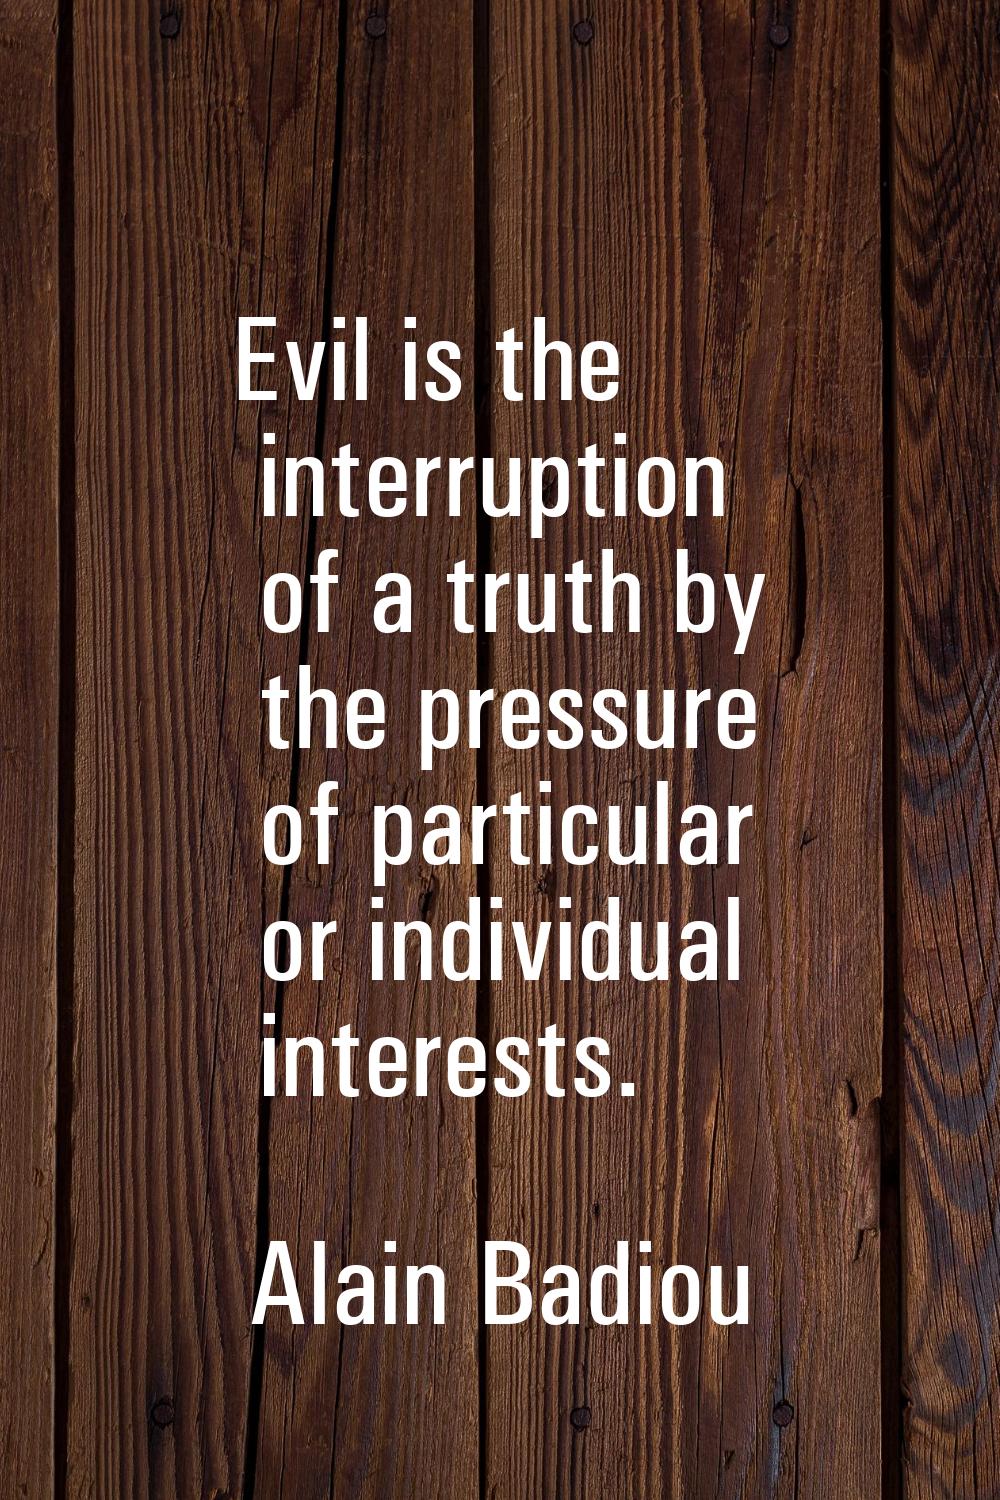 Evil is the interruption of a truth by the pressure of particular or individual interests.